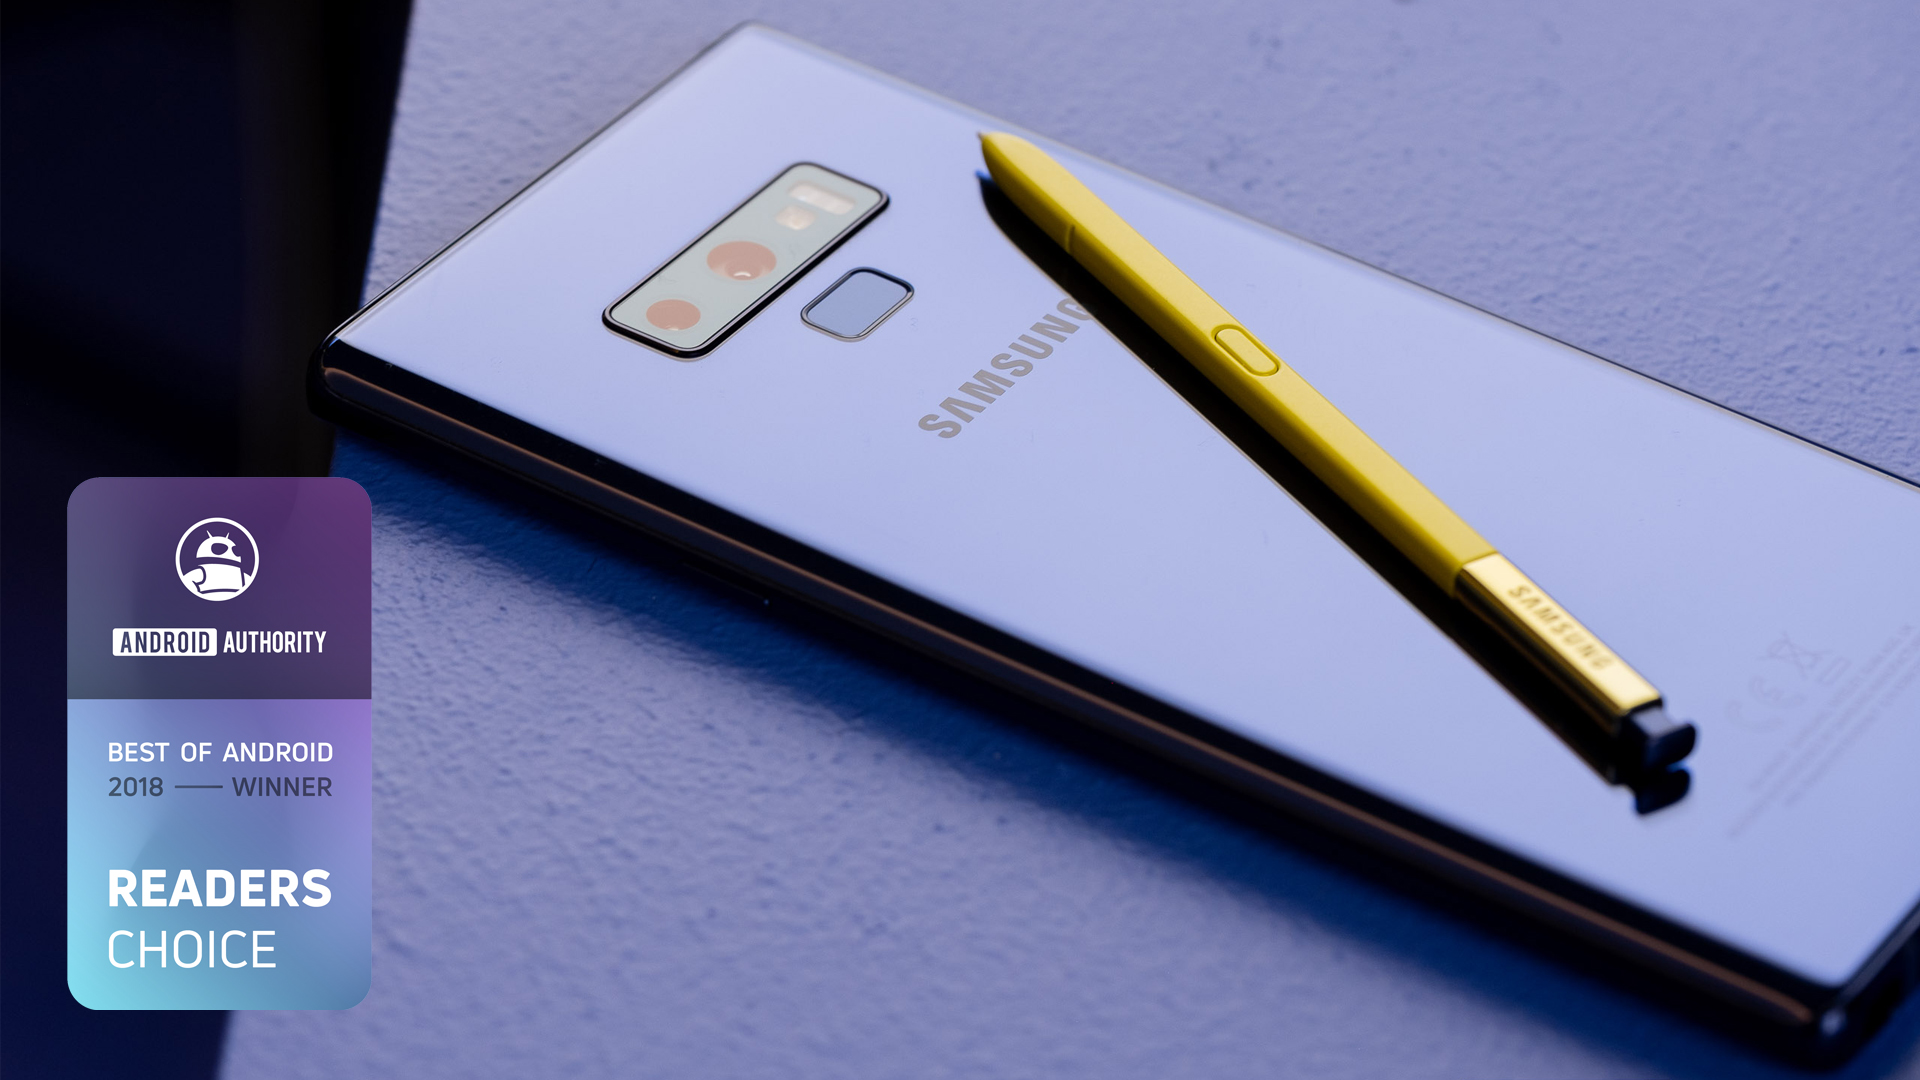 Samsung Galaxy Note 9 Best of Android 2018 Reader's Choice